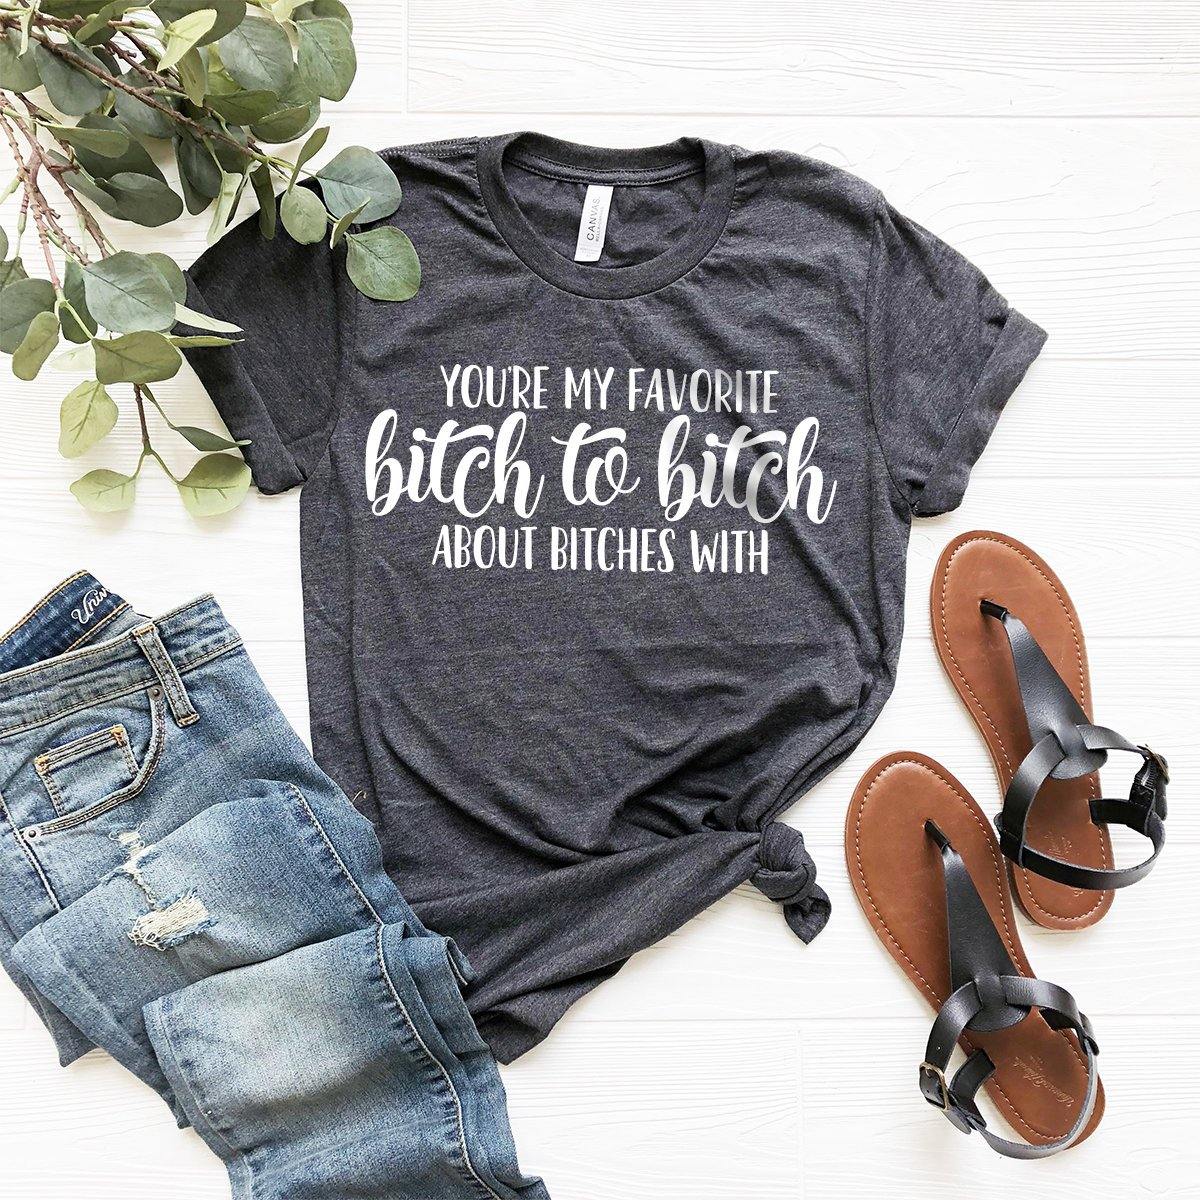 BFF T-Shirt, Besties Shirt, Best Friend Gift, You're My Favorite Bitch To Bitch About Bitches With Shirt, Sorority Sister Shirt, Bestie Gift - Fastdeliverytees.com